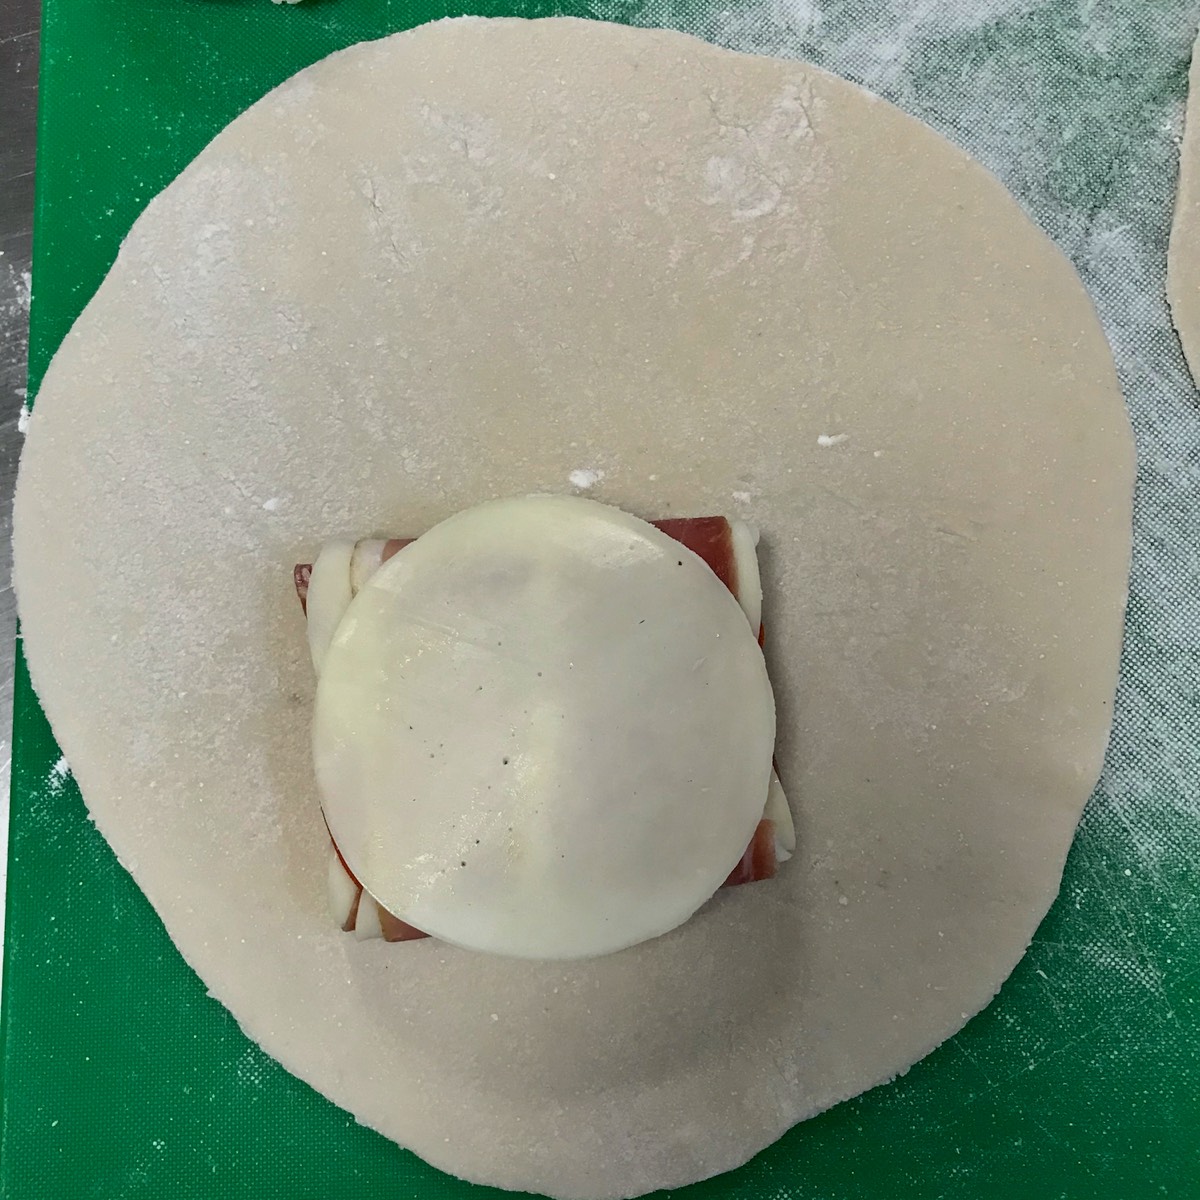 image of a gluten free pizza dough circle with 4 slices of lunch meat and 6 slices of cheese rolled up to be encased in the dough to form a calzone